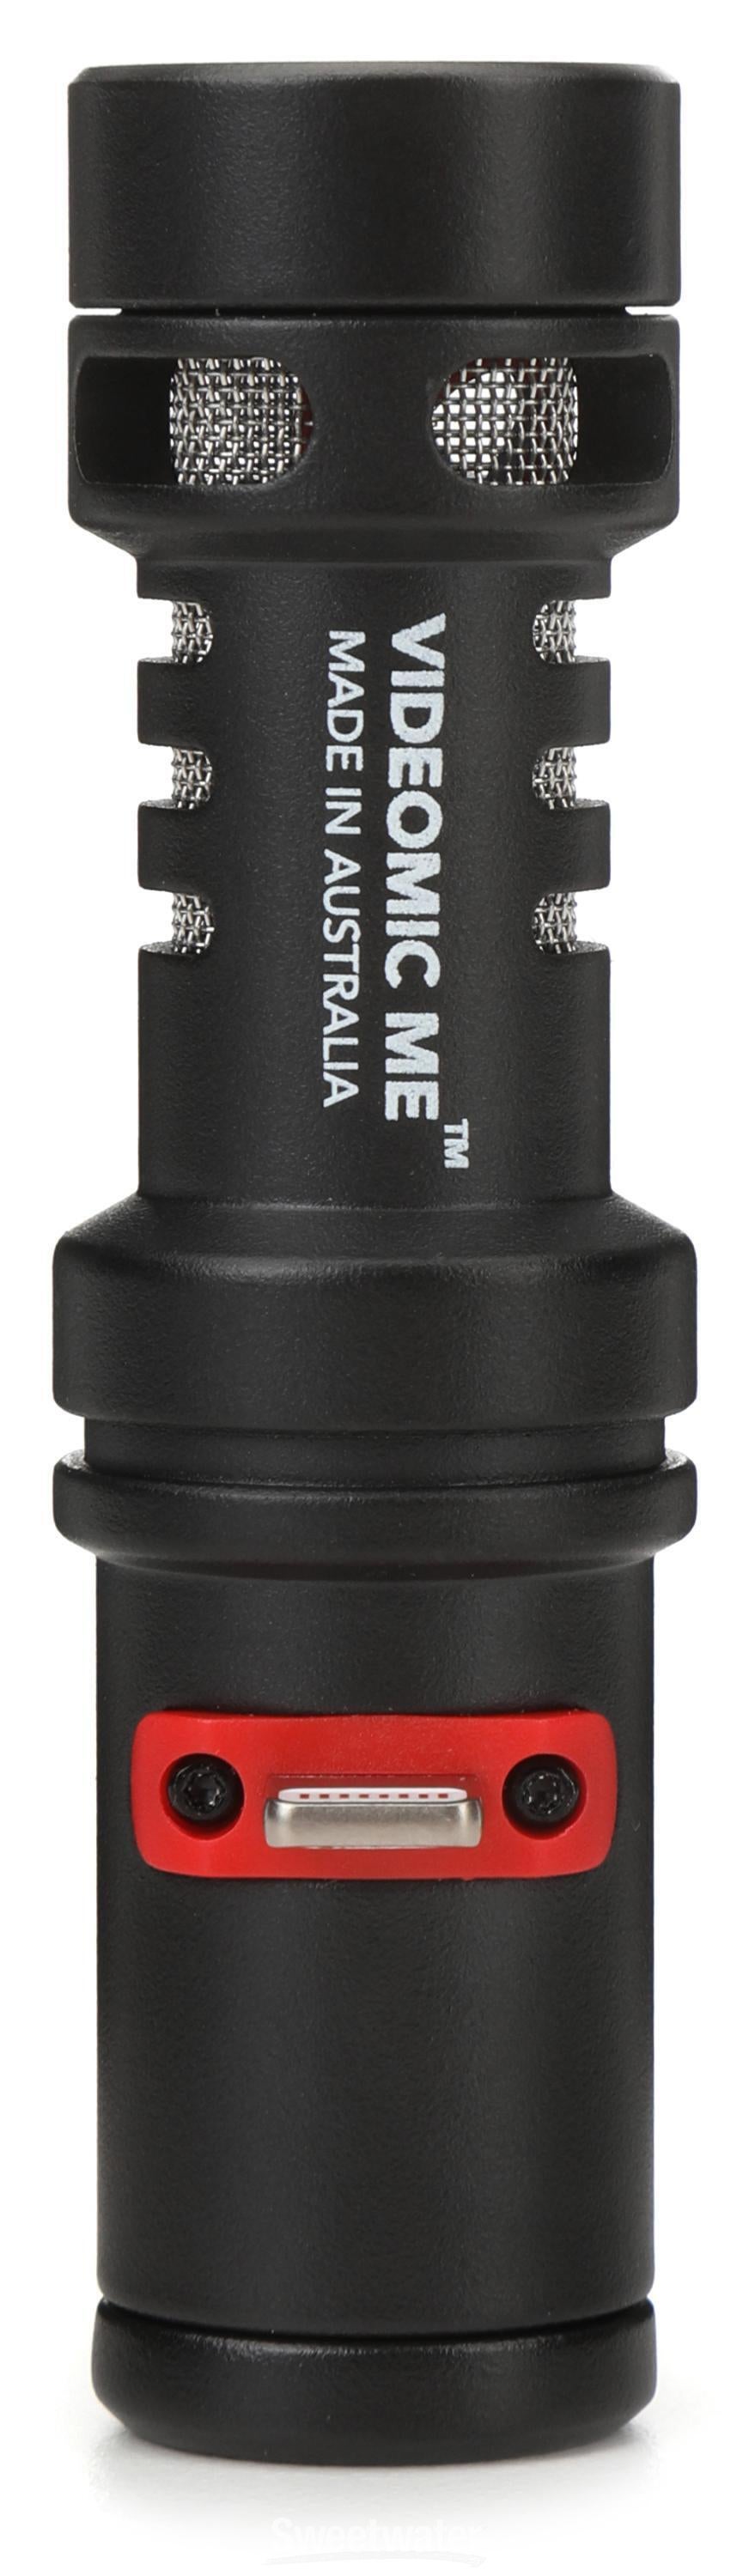 Rode VideoMic Me-L iPhone / iPad Microphone for Video | Sweetwater